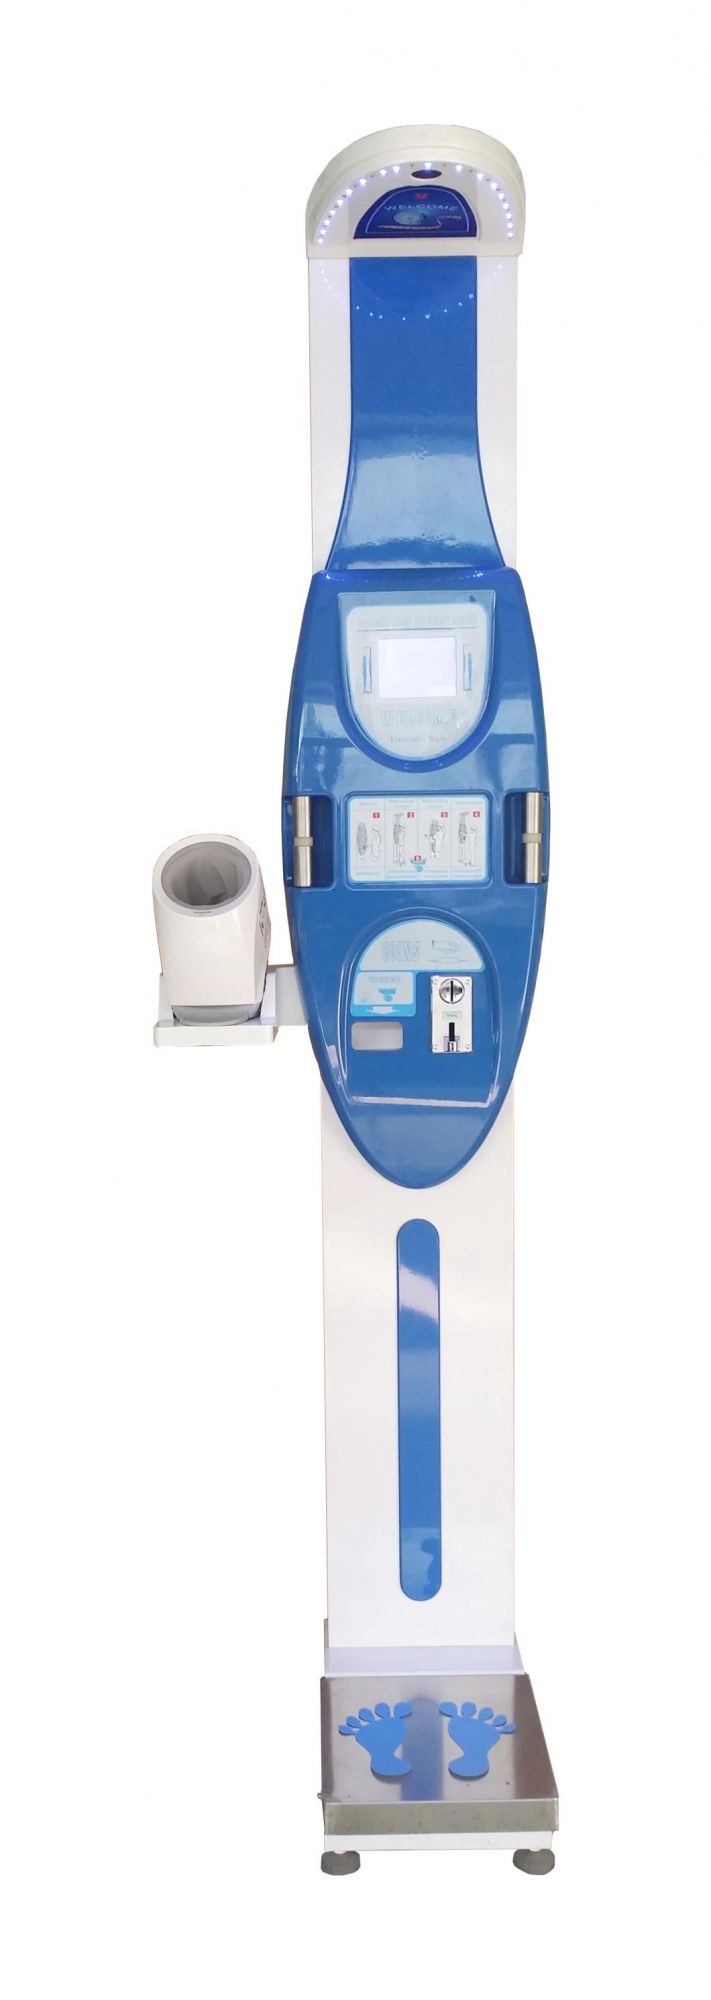 Coin-Operated Electronic Body Scale Multi-Functional Digital Height Weight BMI Body Composition Blood Pressure Vending Machine